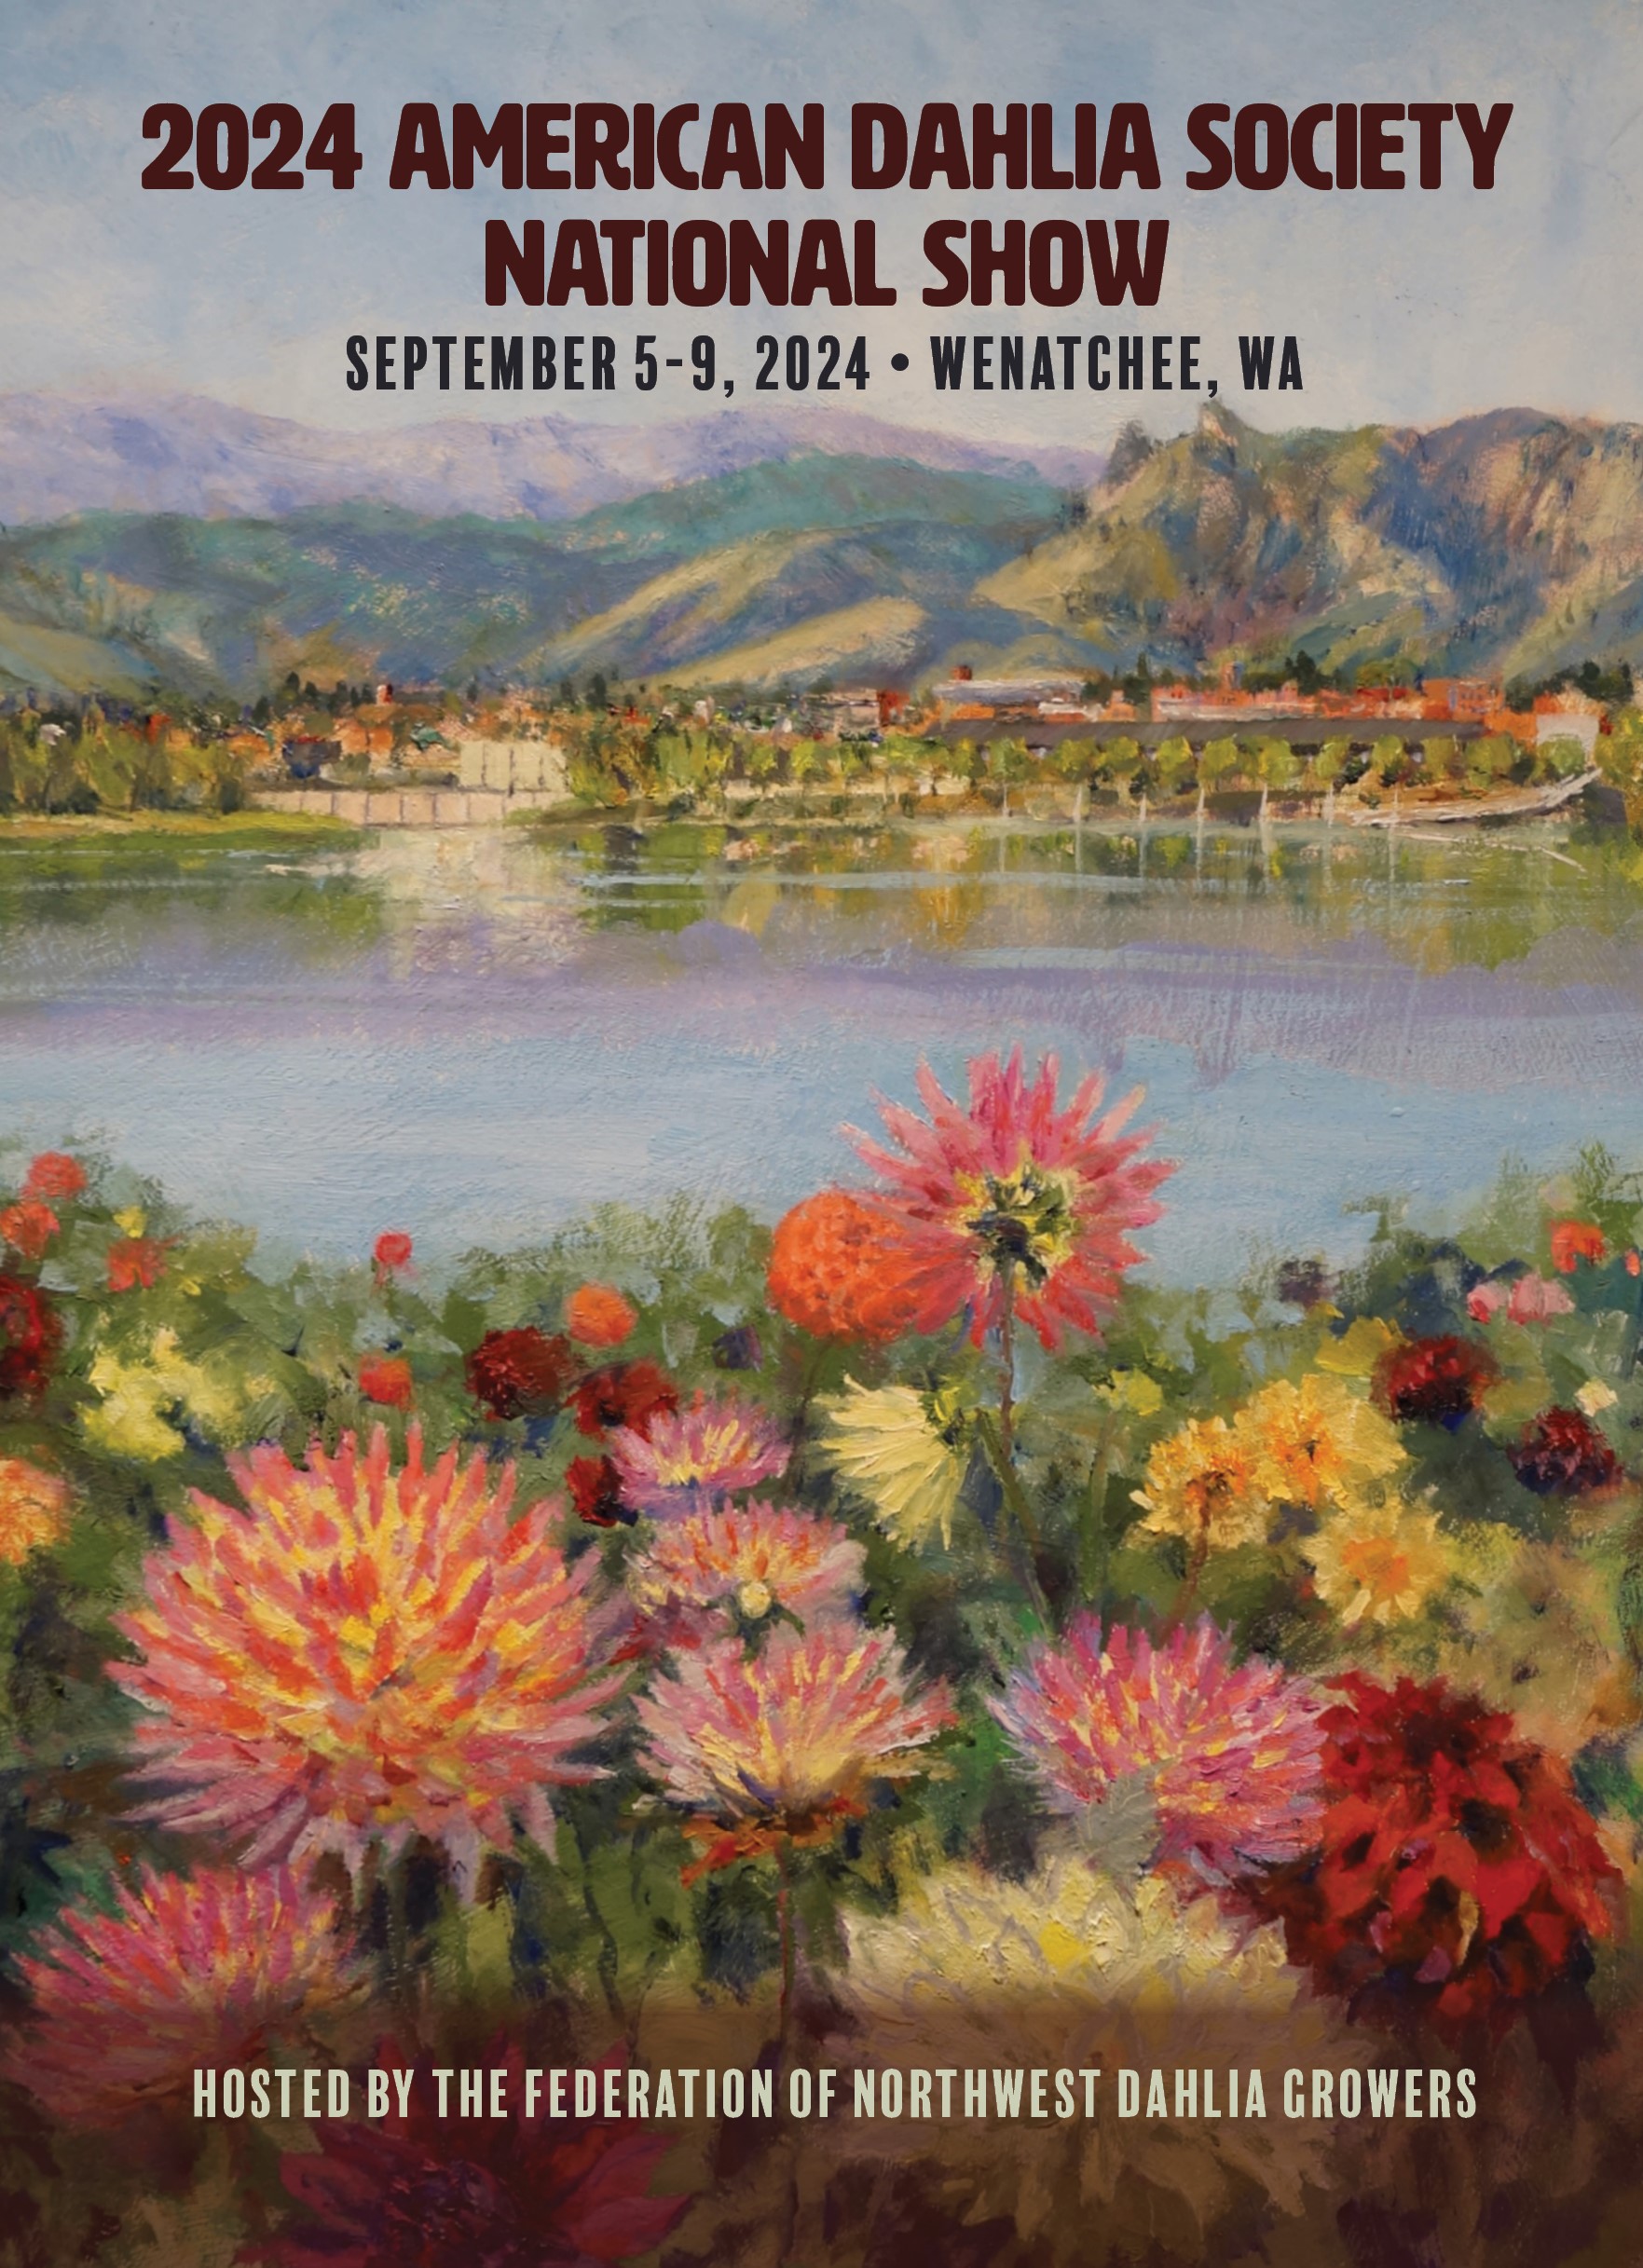 National Show Postcard with painting of dahlias in front of a Wenatchee river scene.